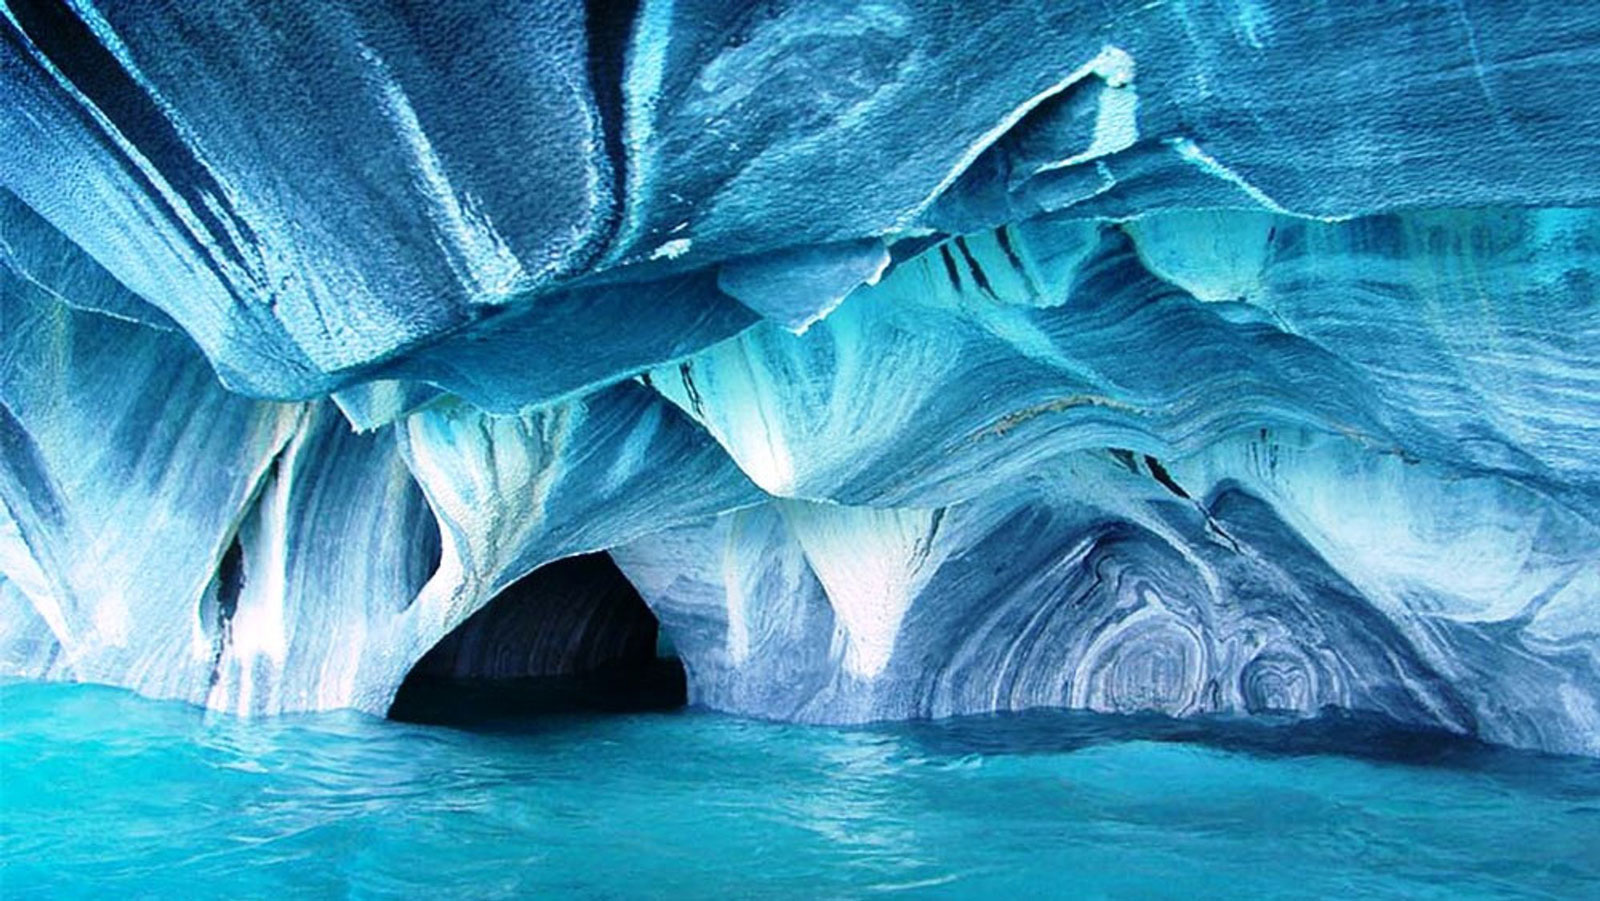 Marble Caves, Chile